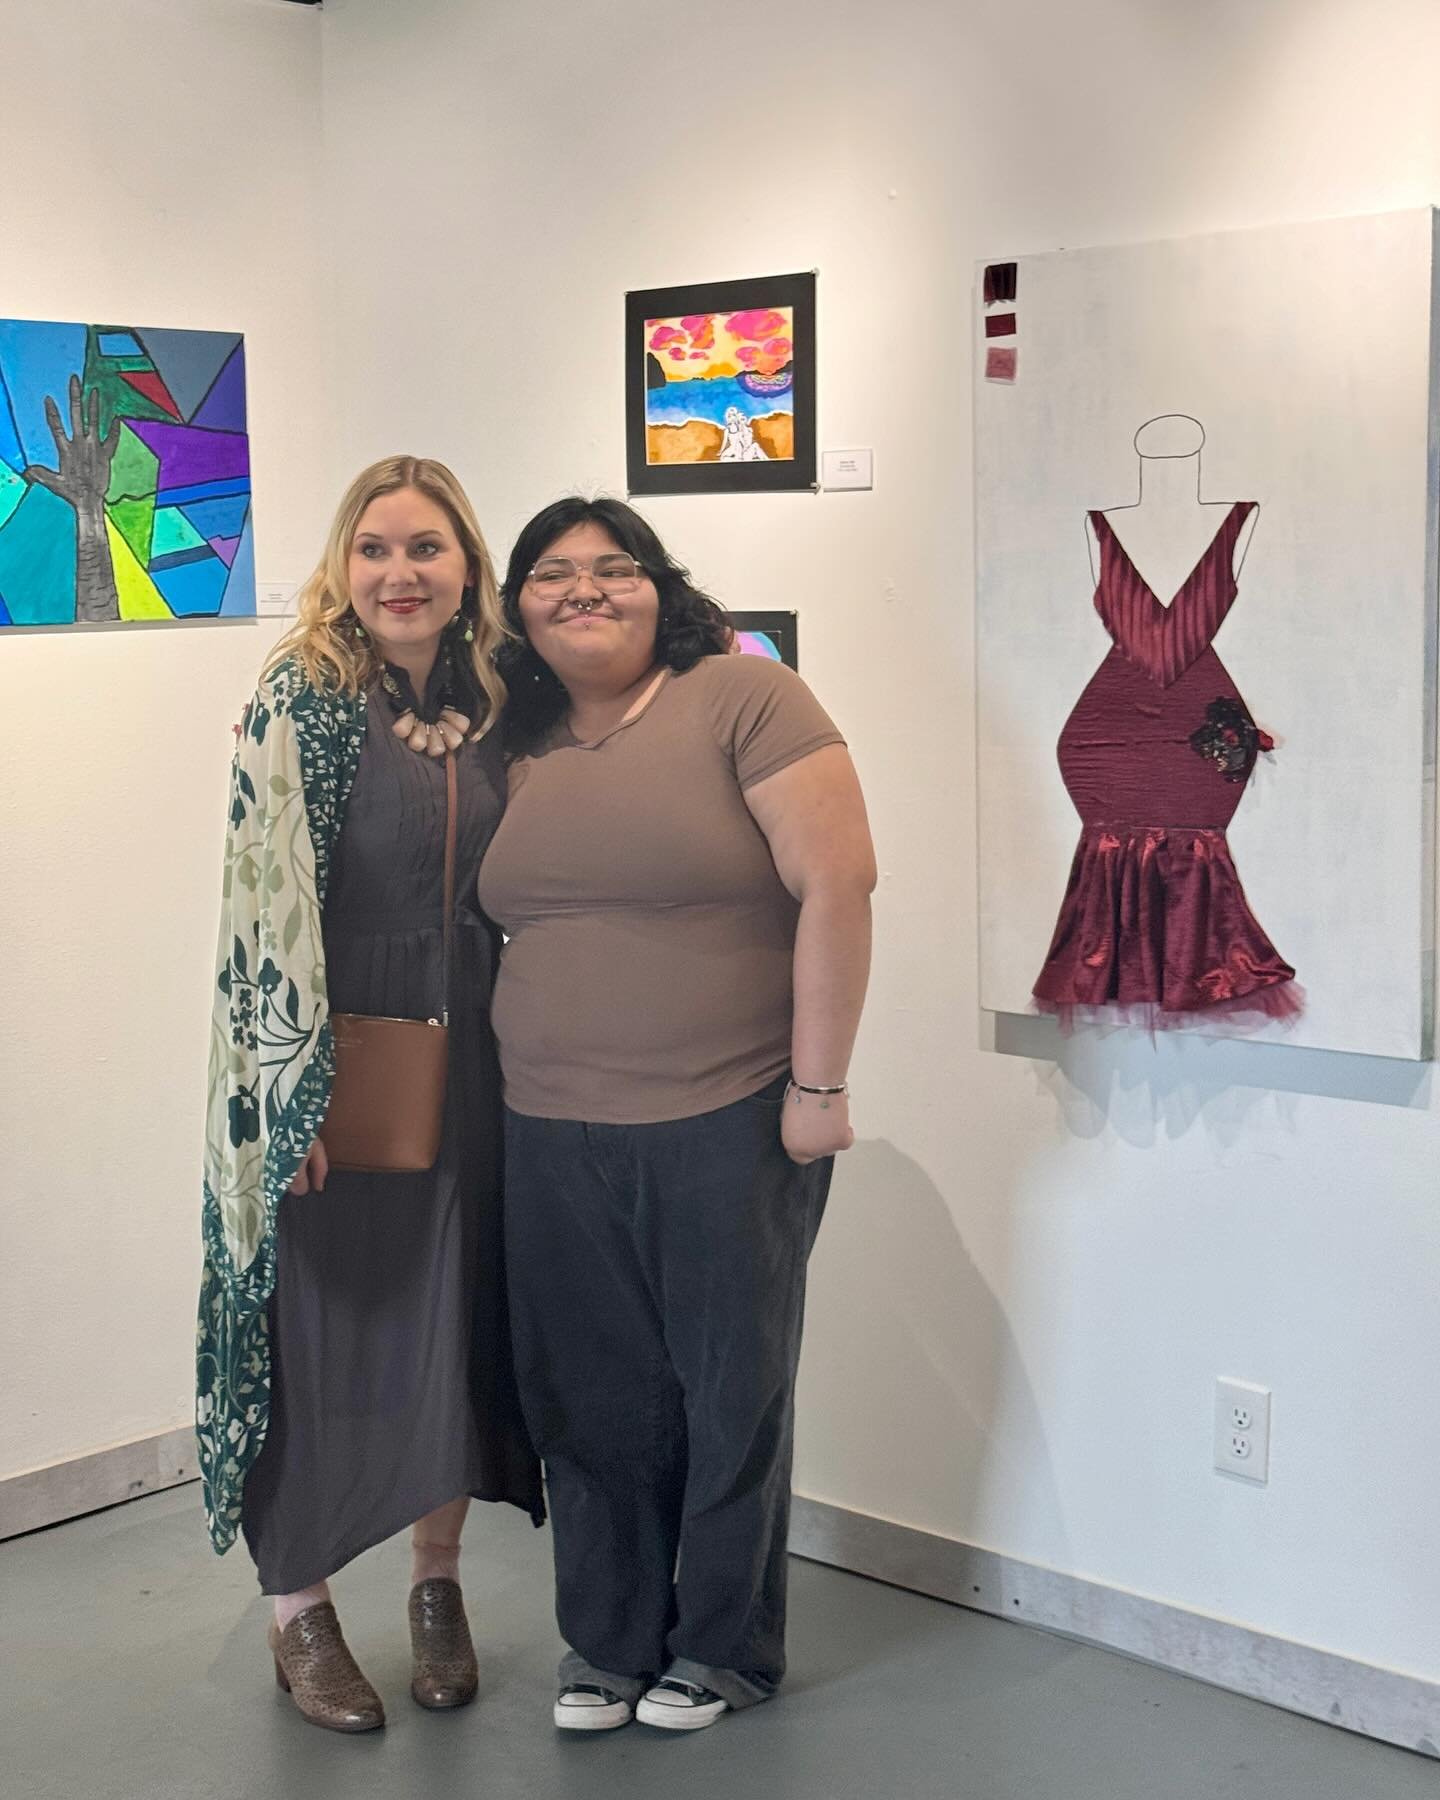 Thank you to everyone who joined us for the @wwhs.visualart @woodrowwilsonhighschool AP art students exhibition opening reception, curated by their art teacher Katrina Rasmussen. @kmrasmussenfineart
Thank you to the @wwhspta for providing the refresh